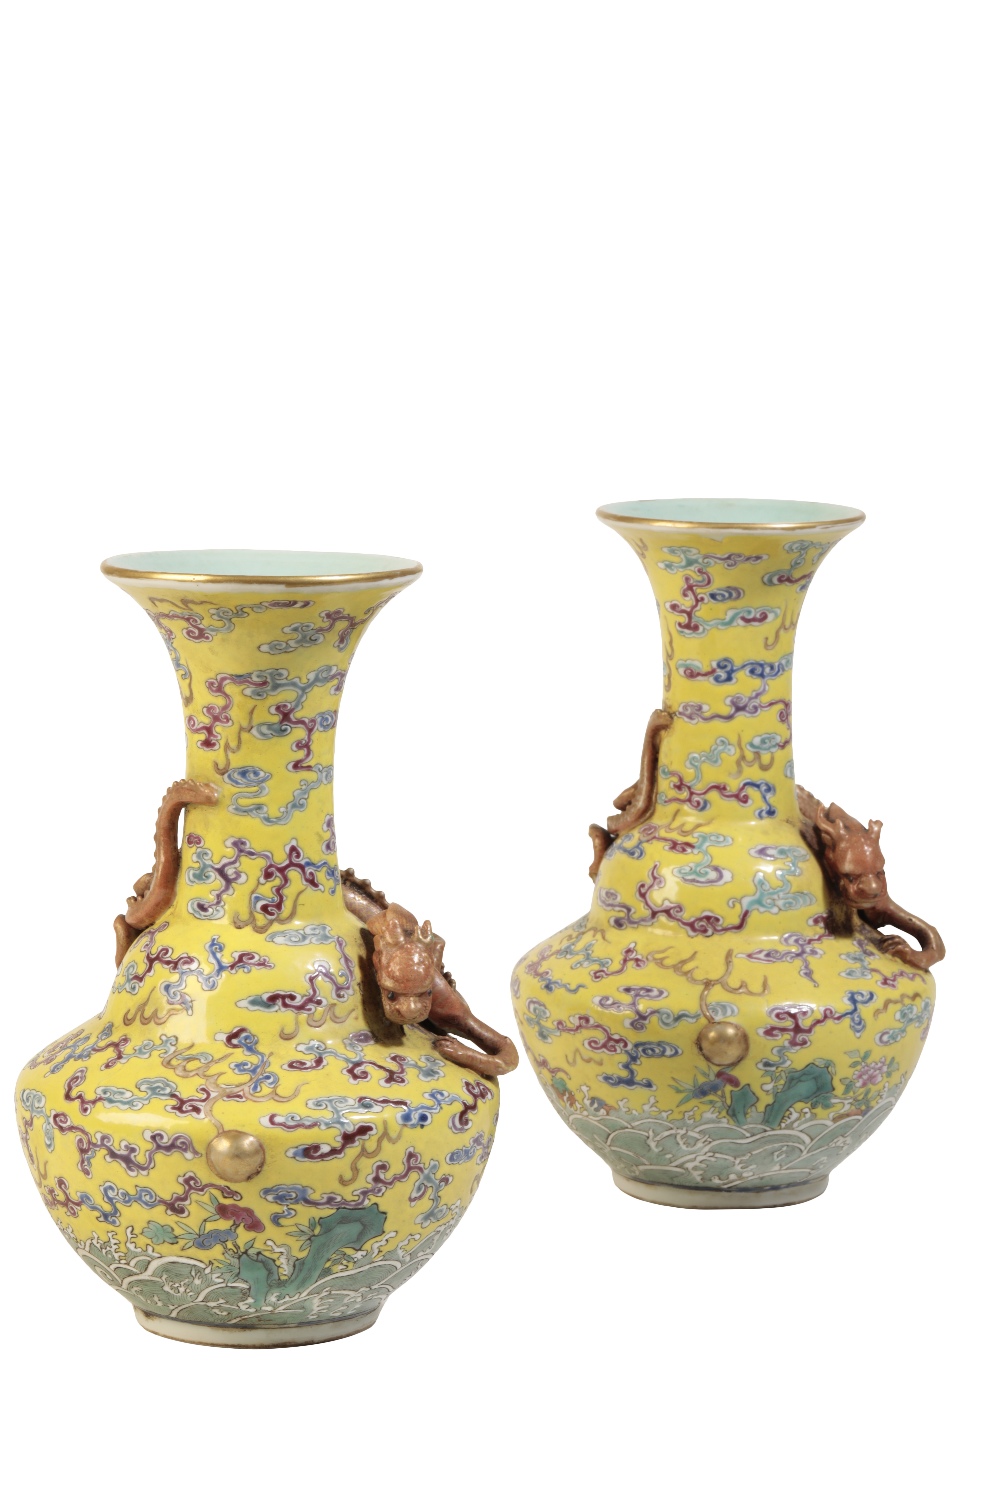 PAIR OF FAMILLE ROSE YELLOW-GROUND VASES, QIANLONG SEAL MARKS BUT 19TH CENTURY - Image 3 of 4